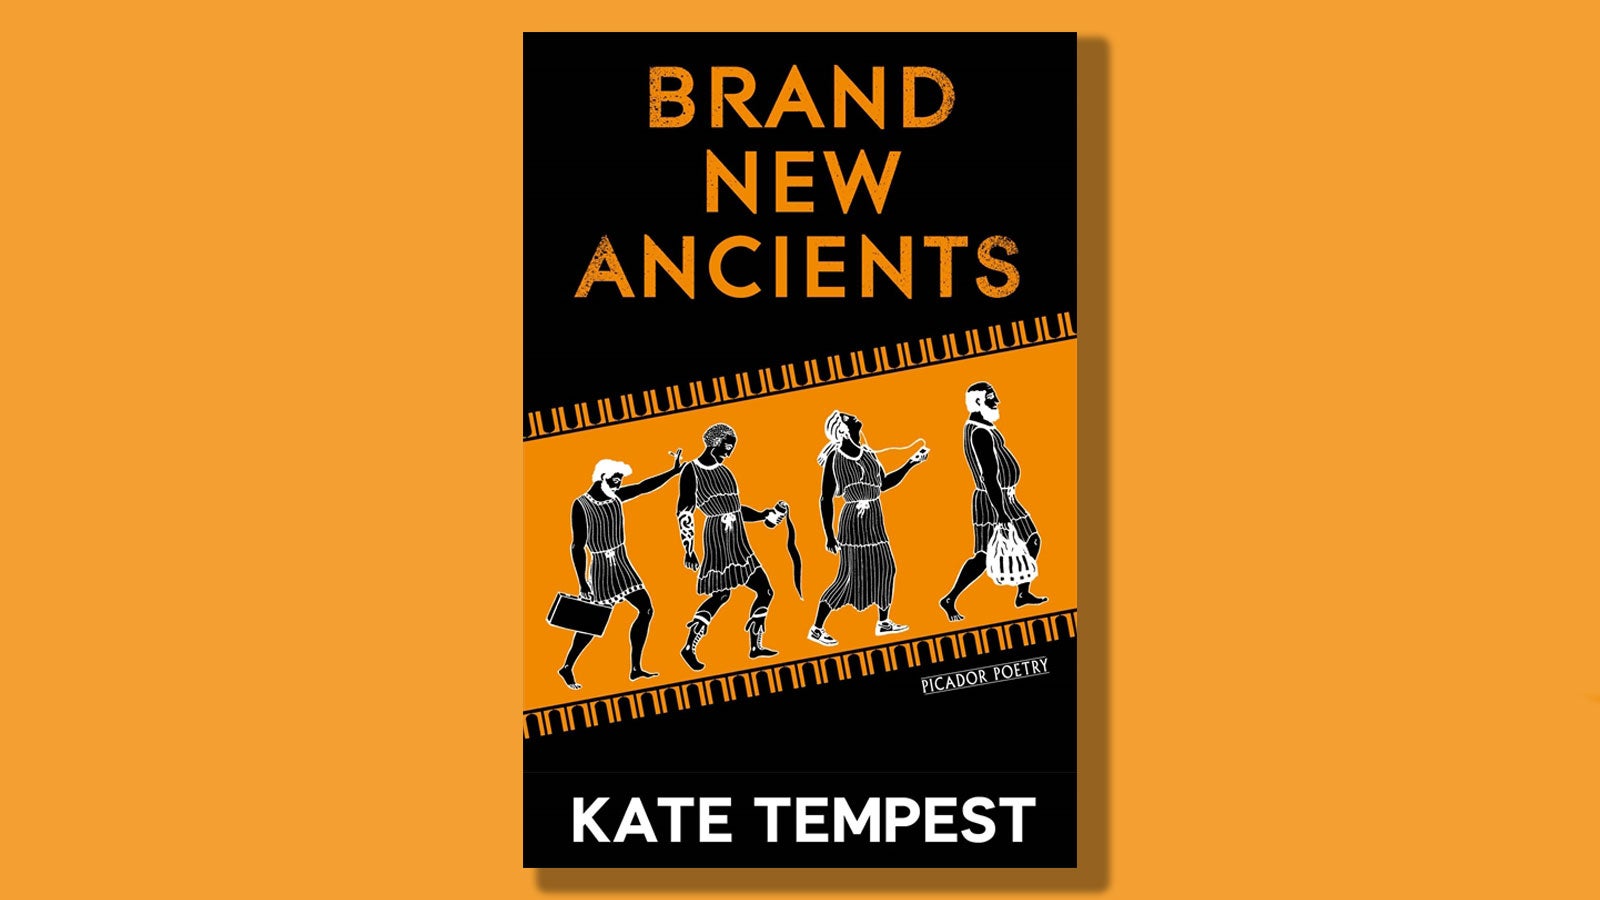 Brand New Ancients book cover